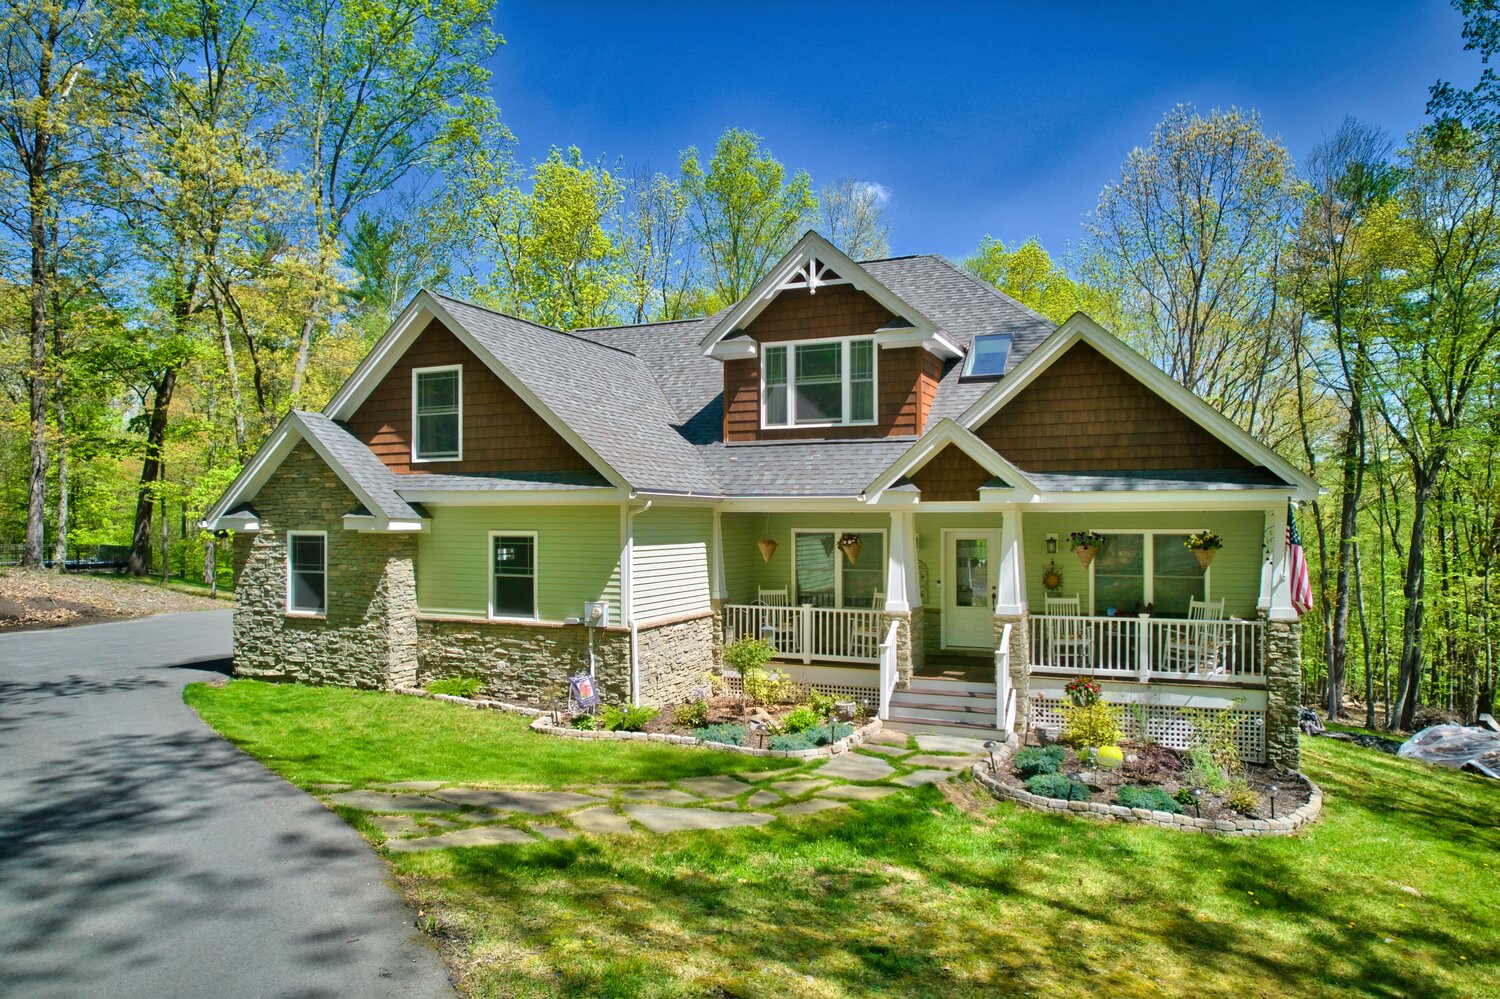 The gorgeous Craftsman house at 143 Pond Dr., Matamoras, PA..